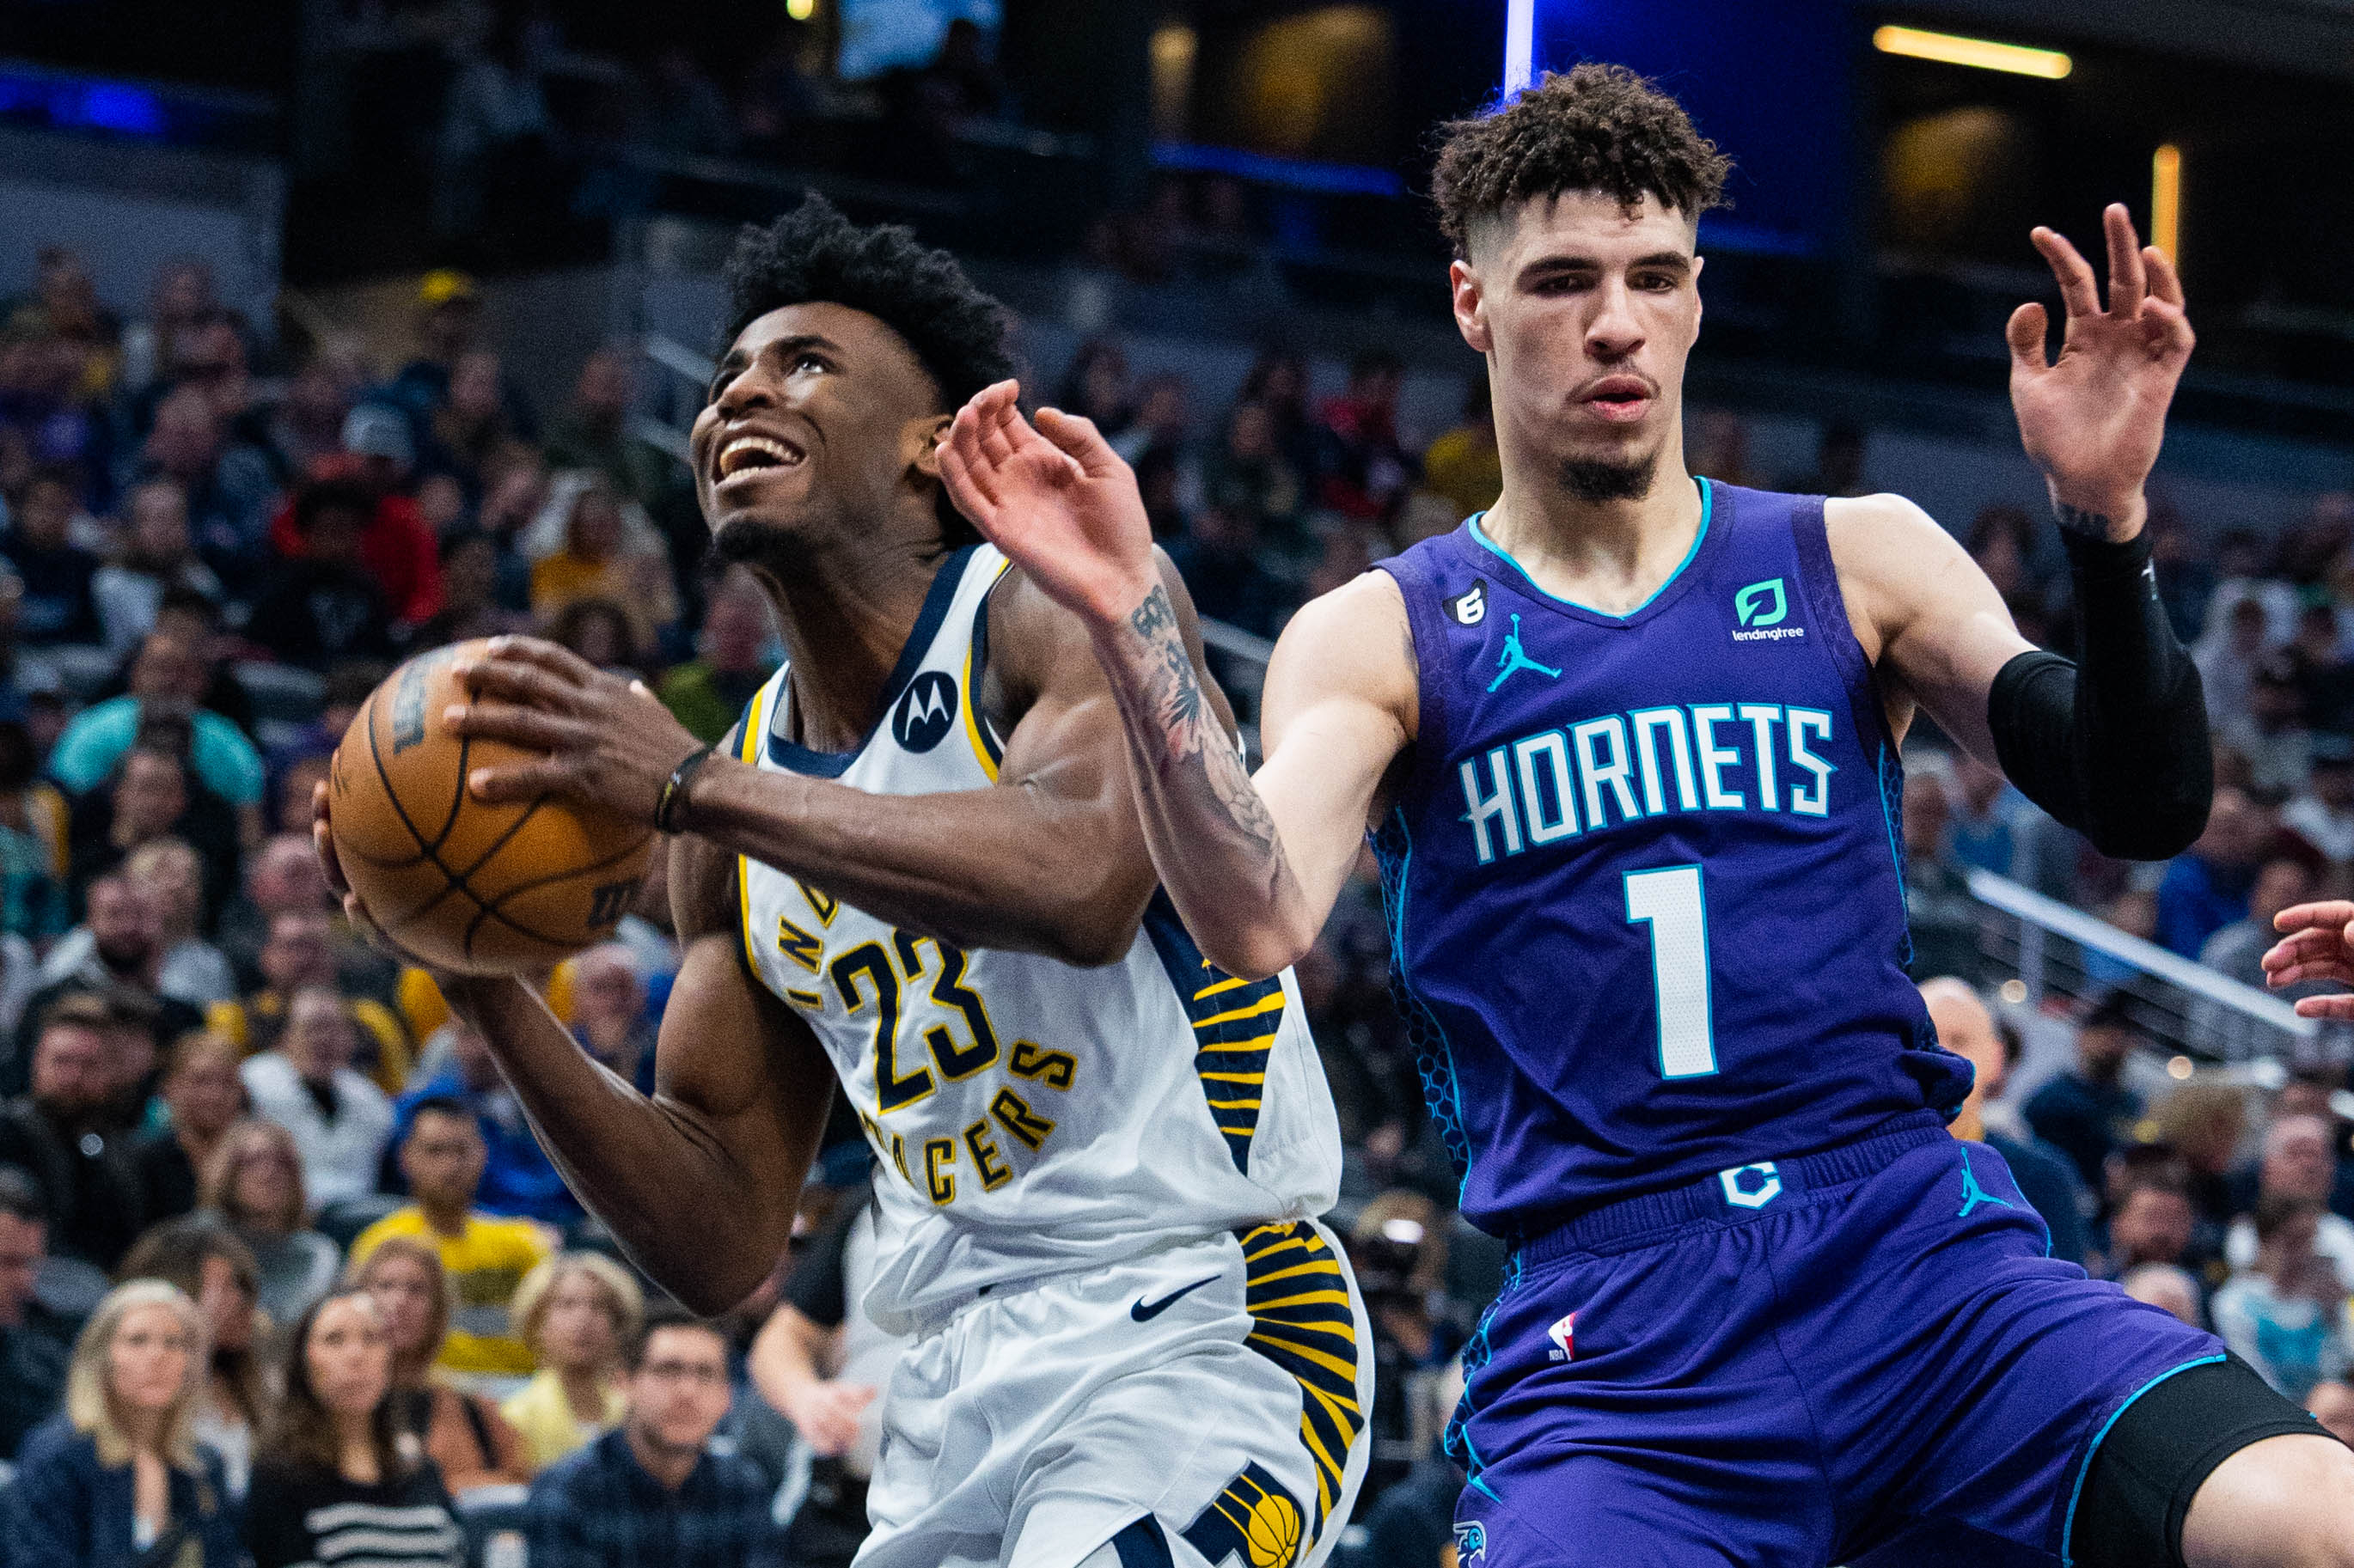 Indiana Pacers shine in clutch again to take down Charlotte Hornets